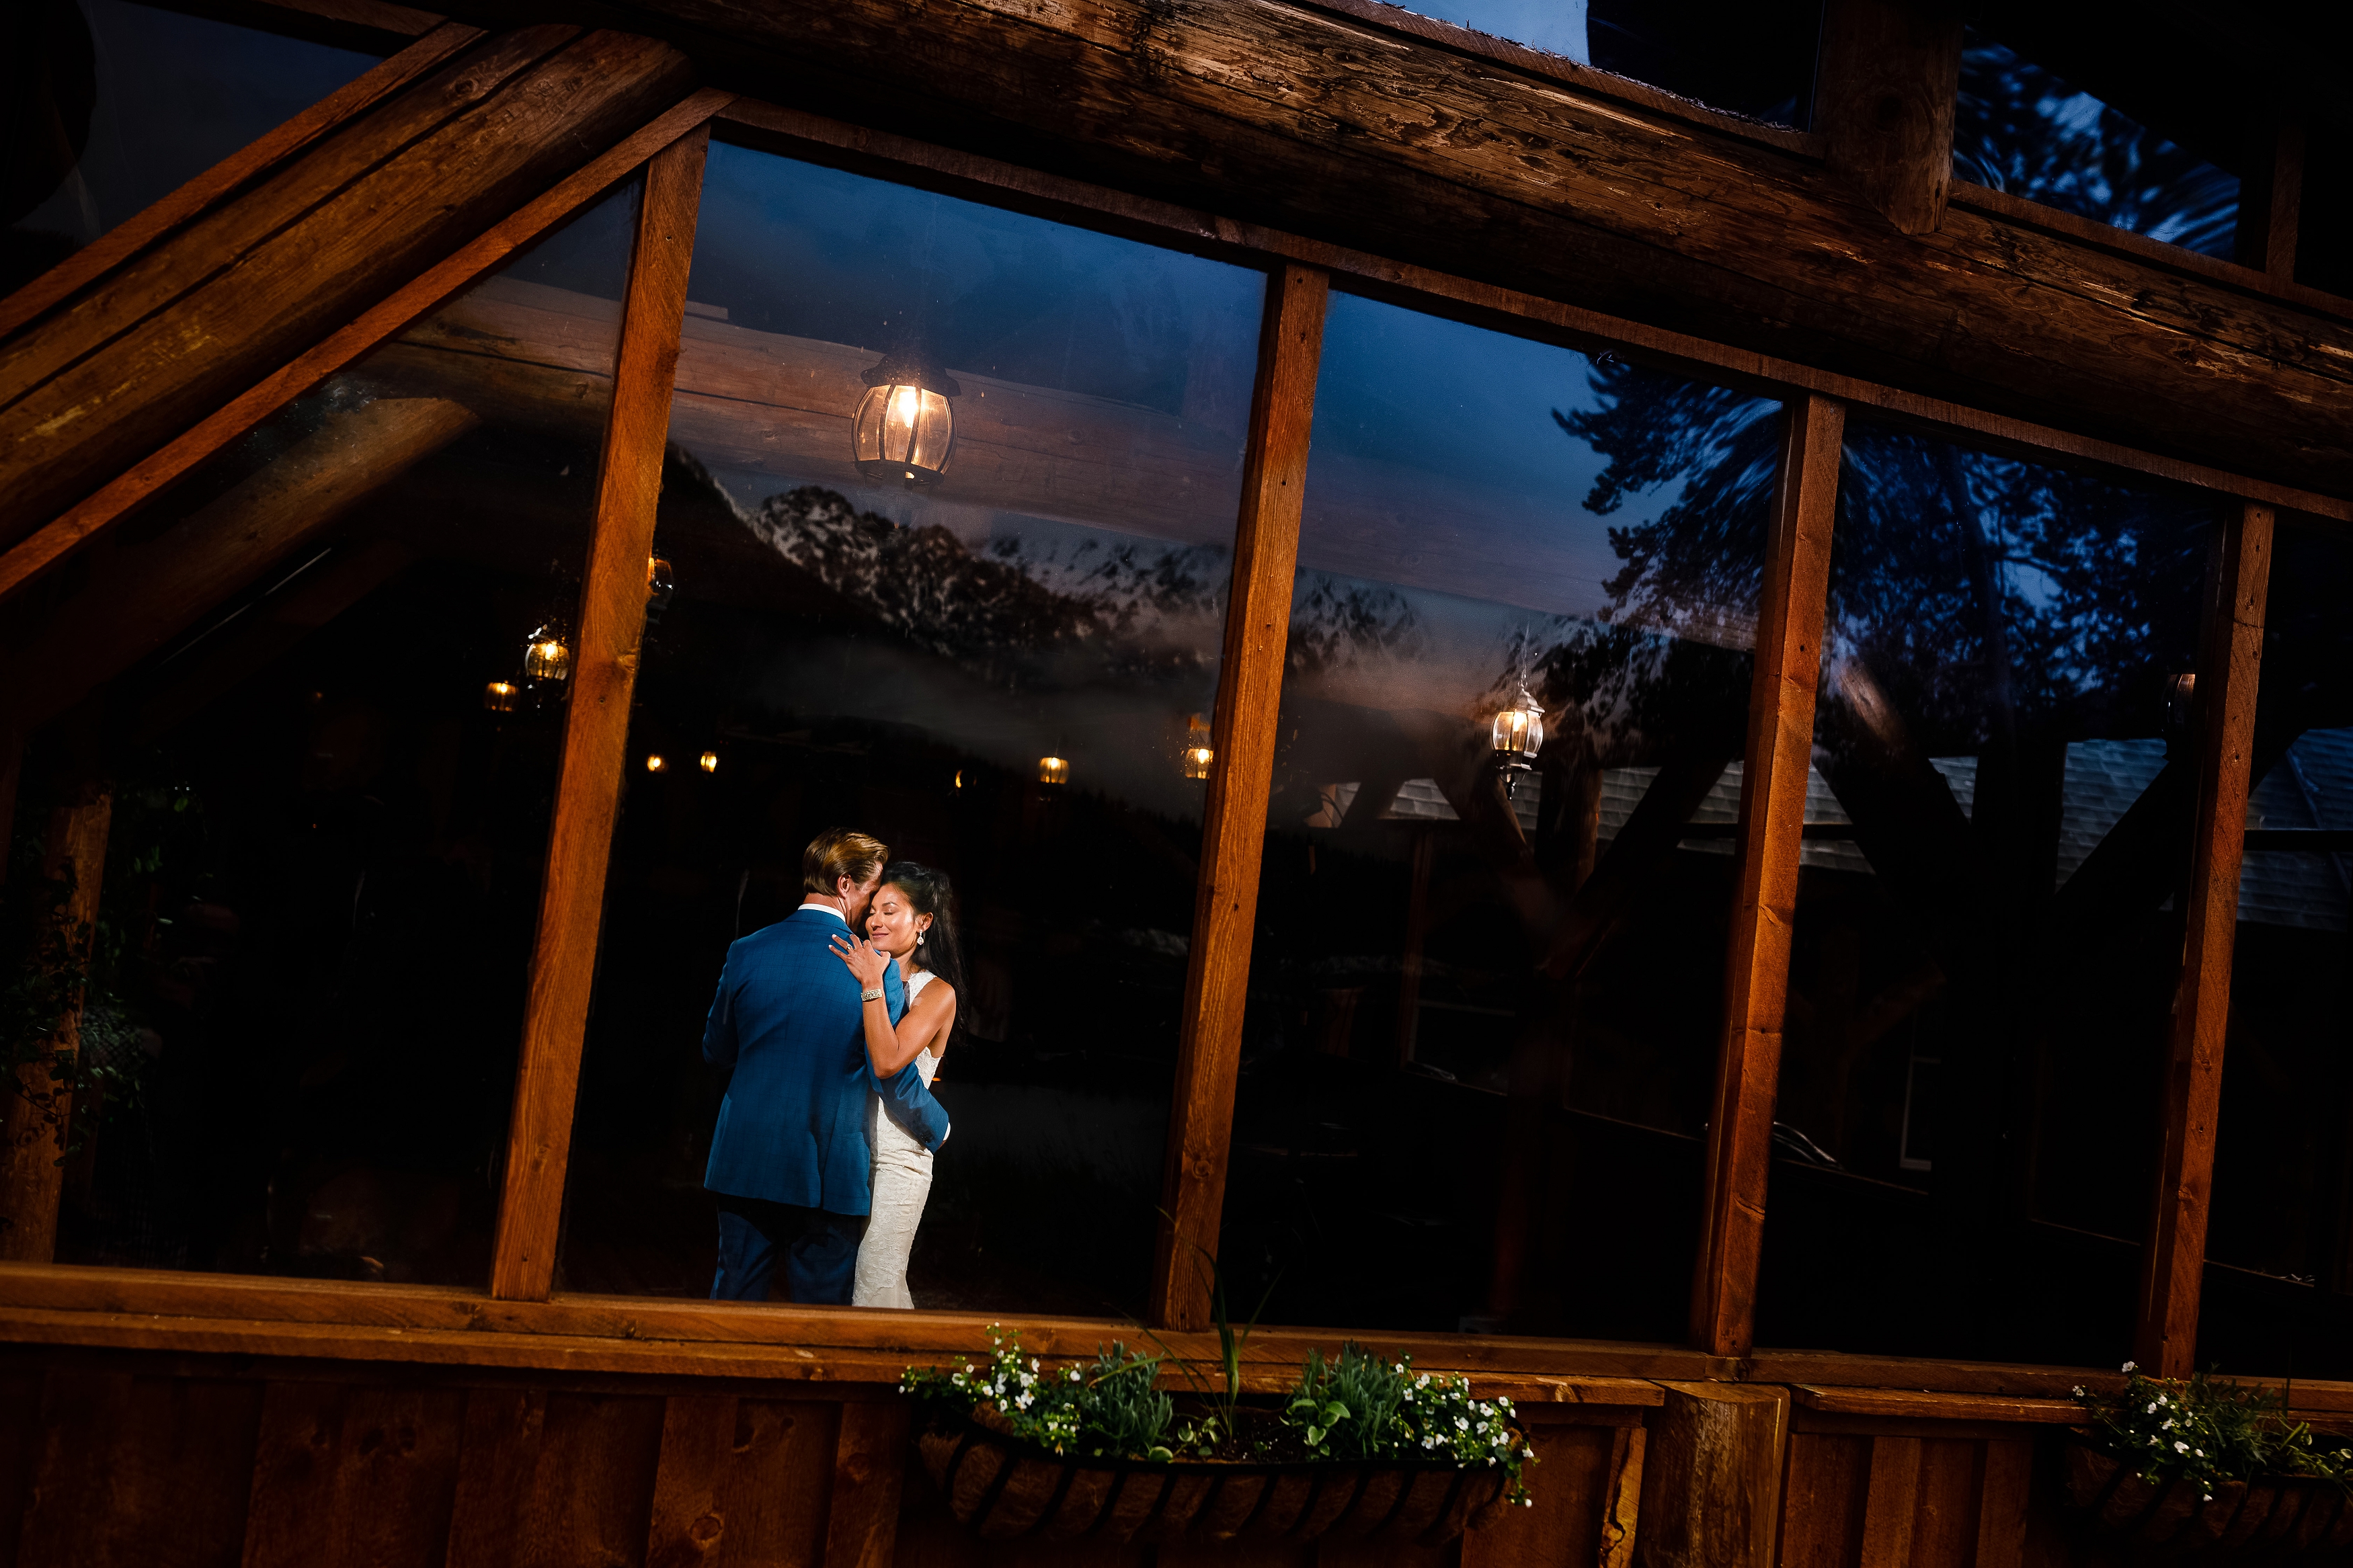 Their first dance inside the lodge at Piney River Ranch as the Gore Range catches its last bit of alpenglow.